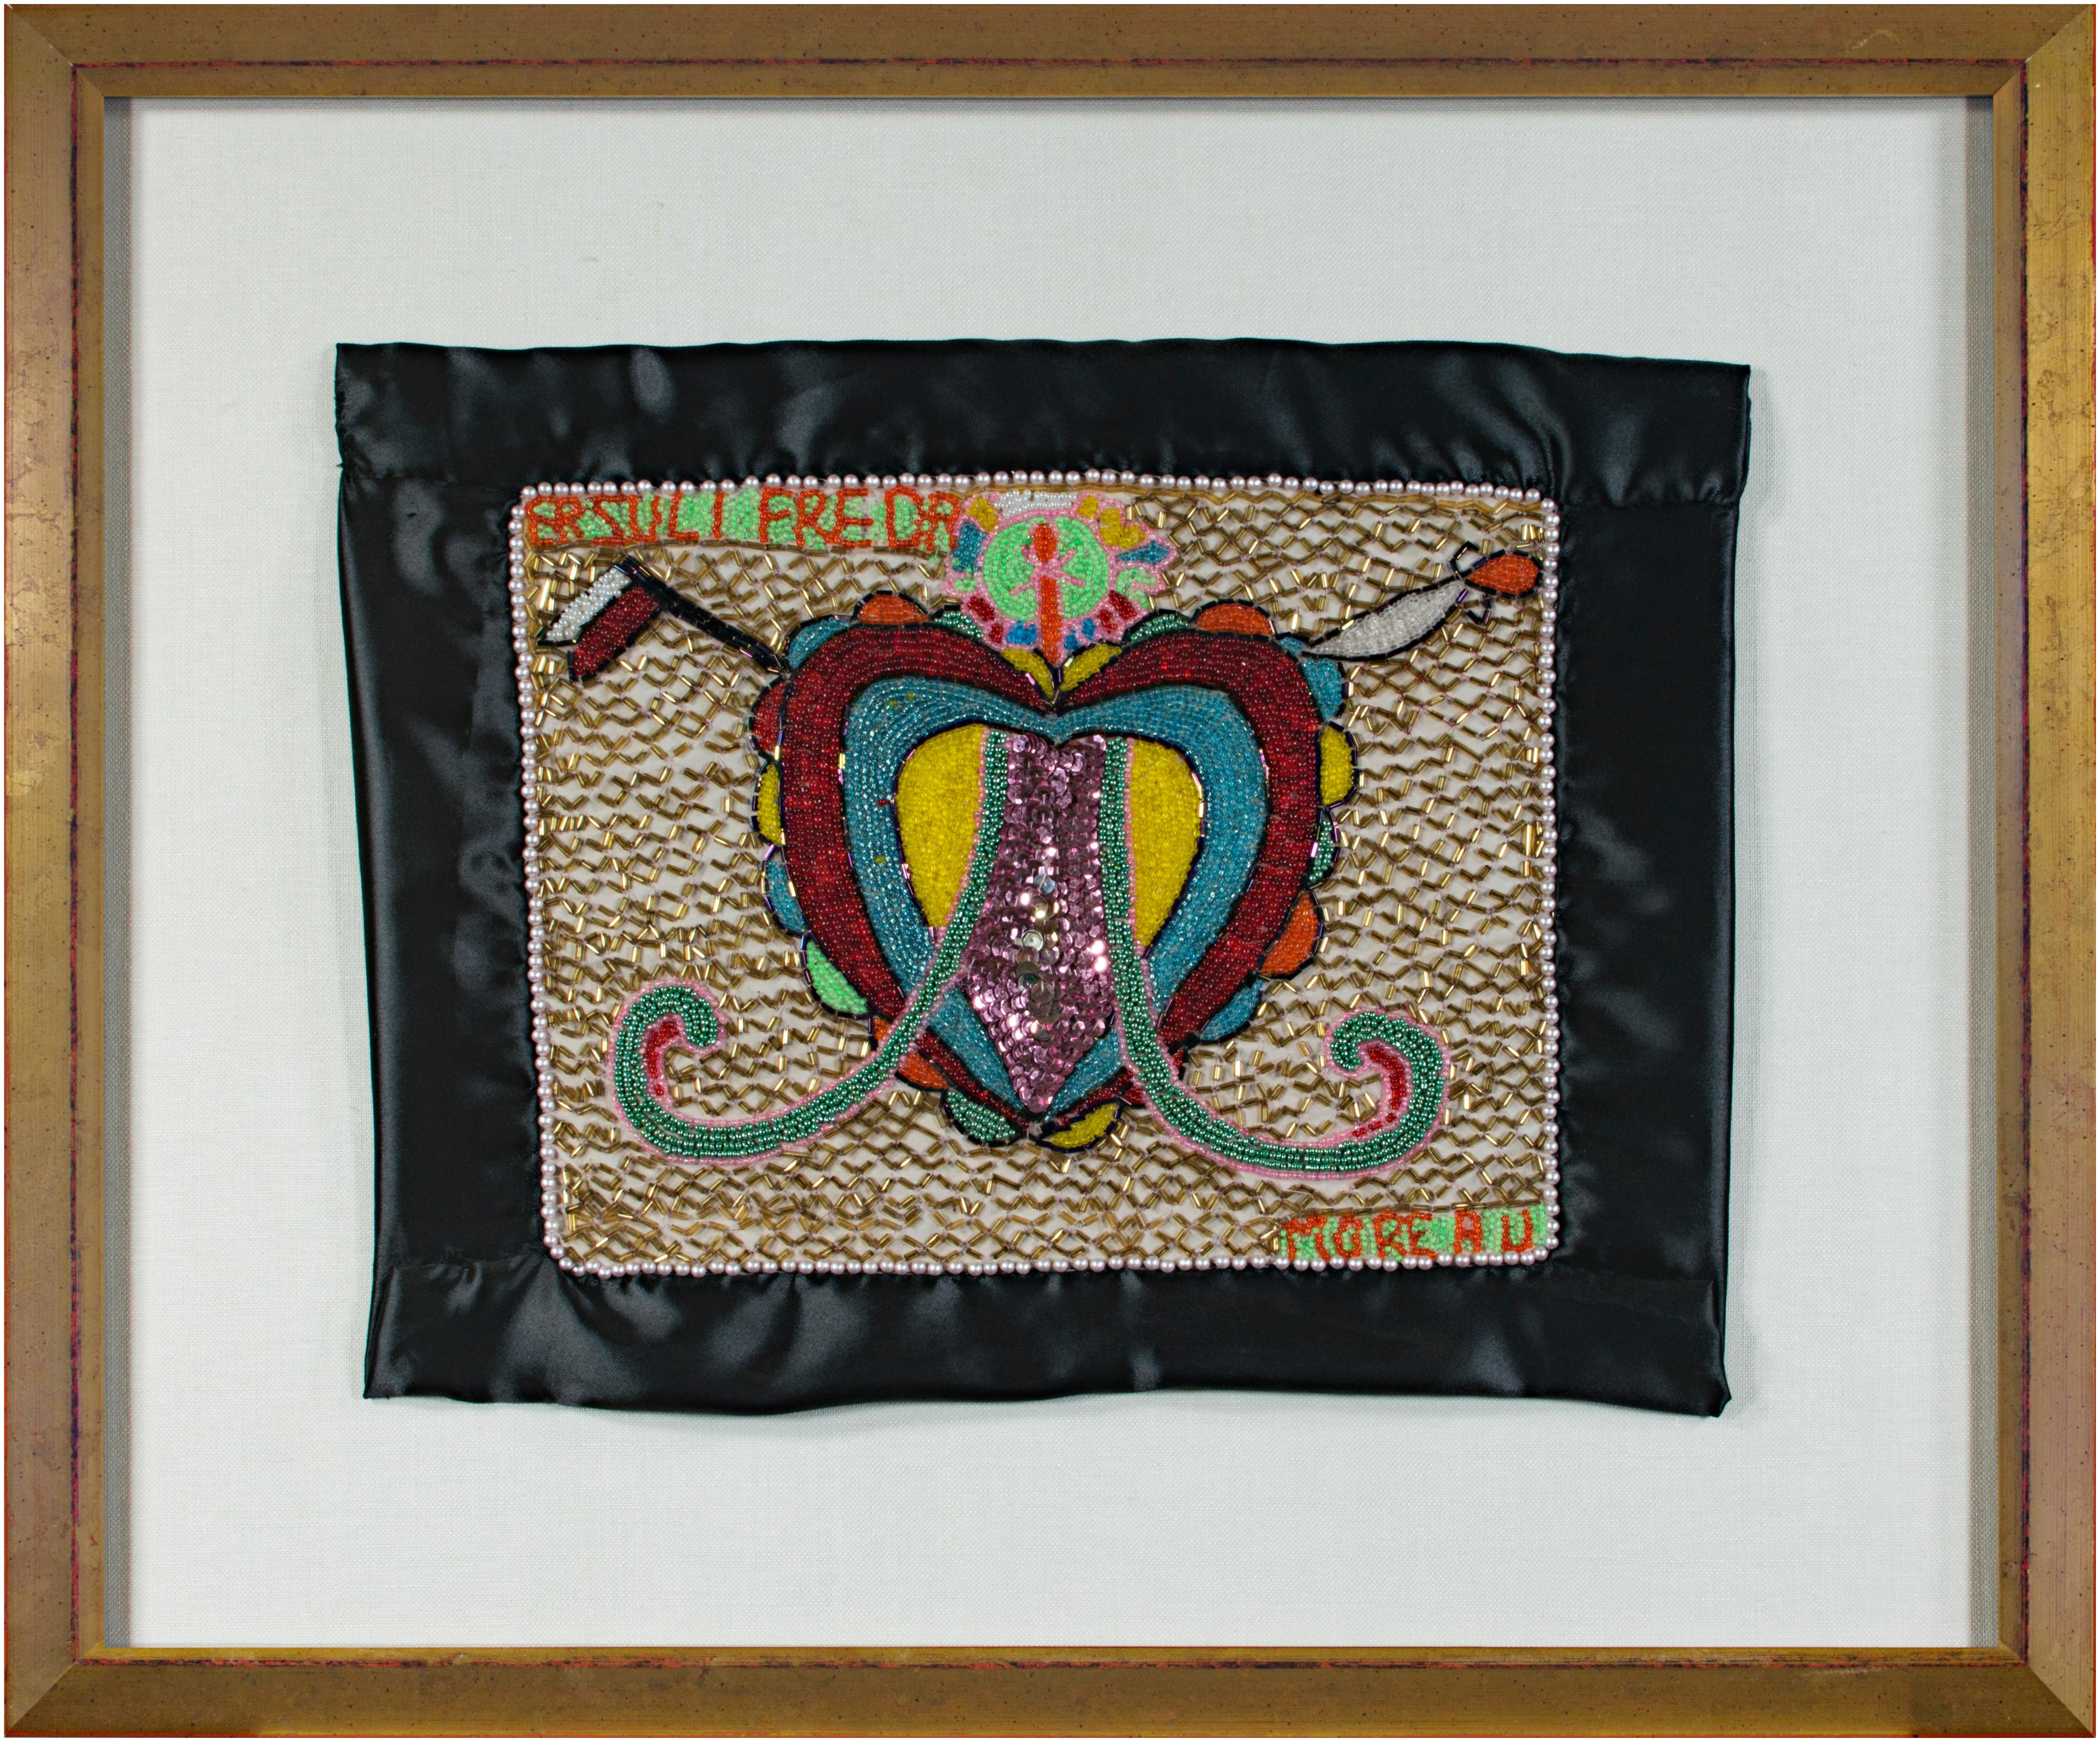 Haitian Voodoo Beaded Flag with Ezili Freda signed "Moreau" - Art by Unknown